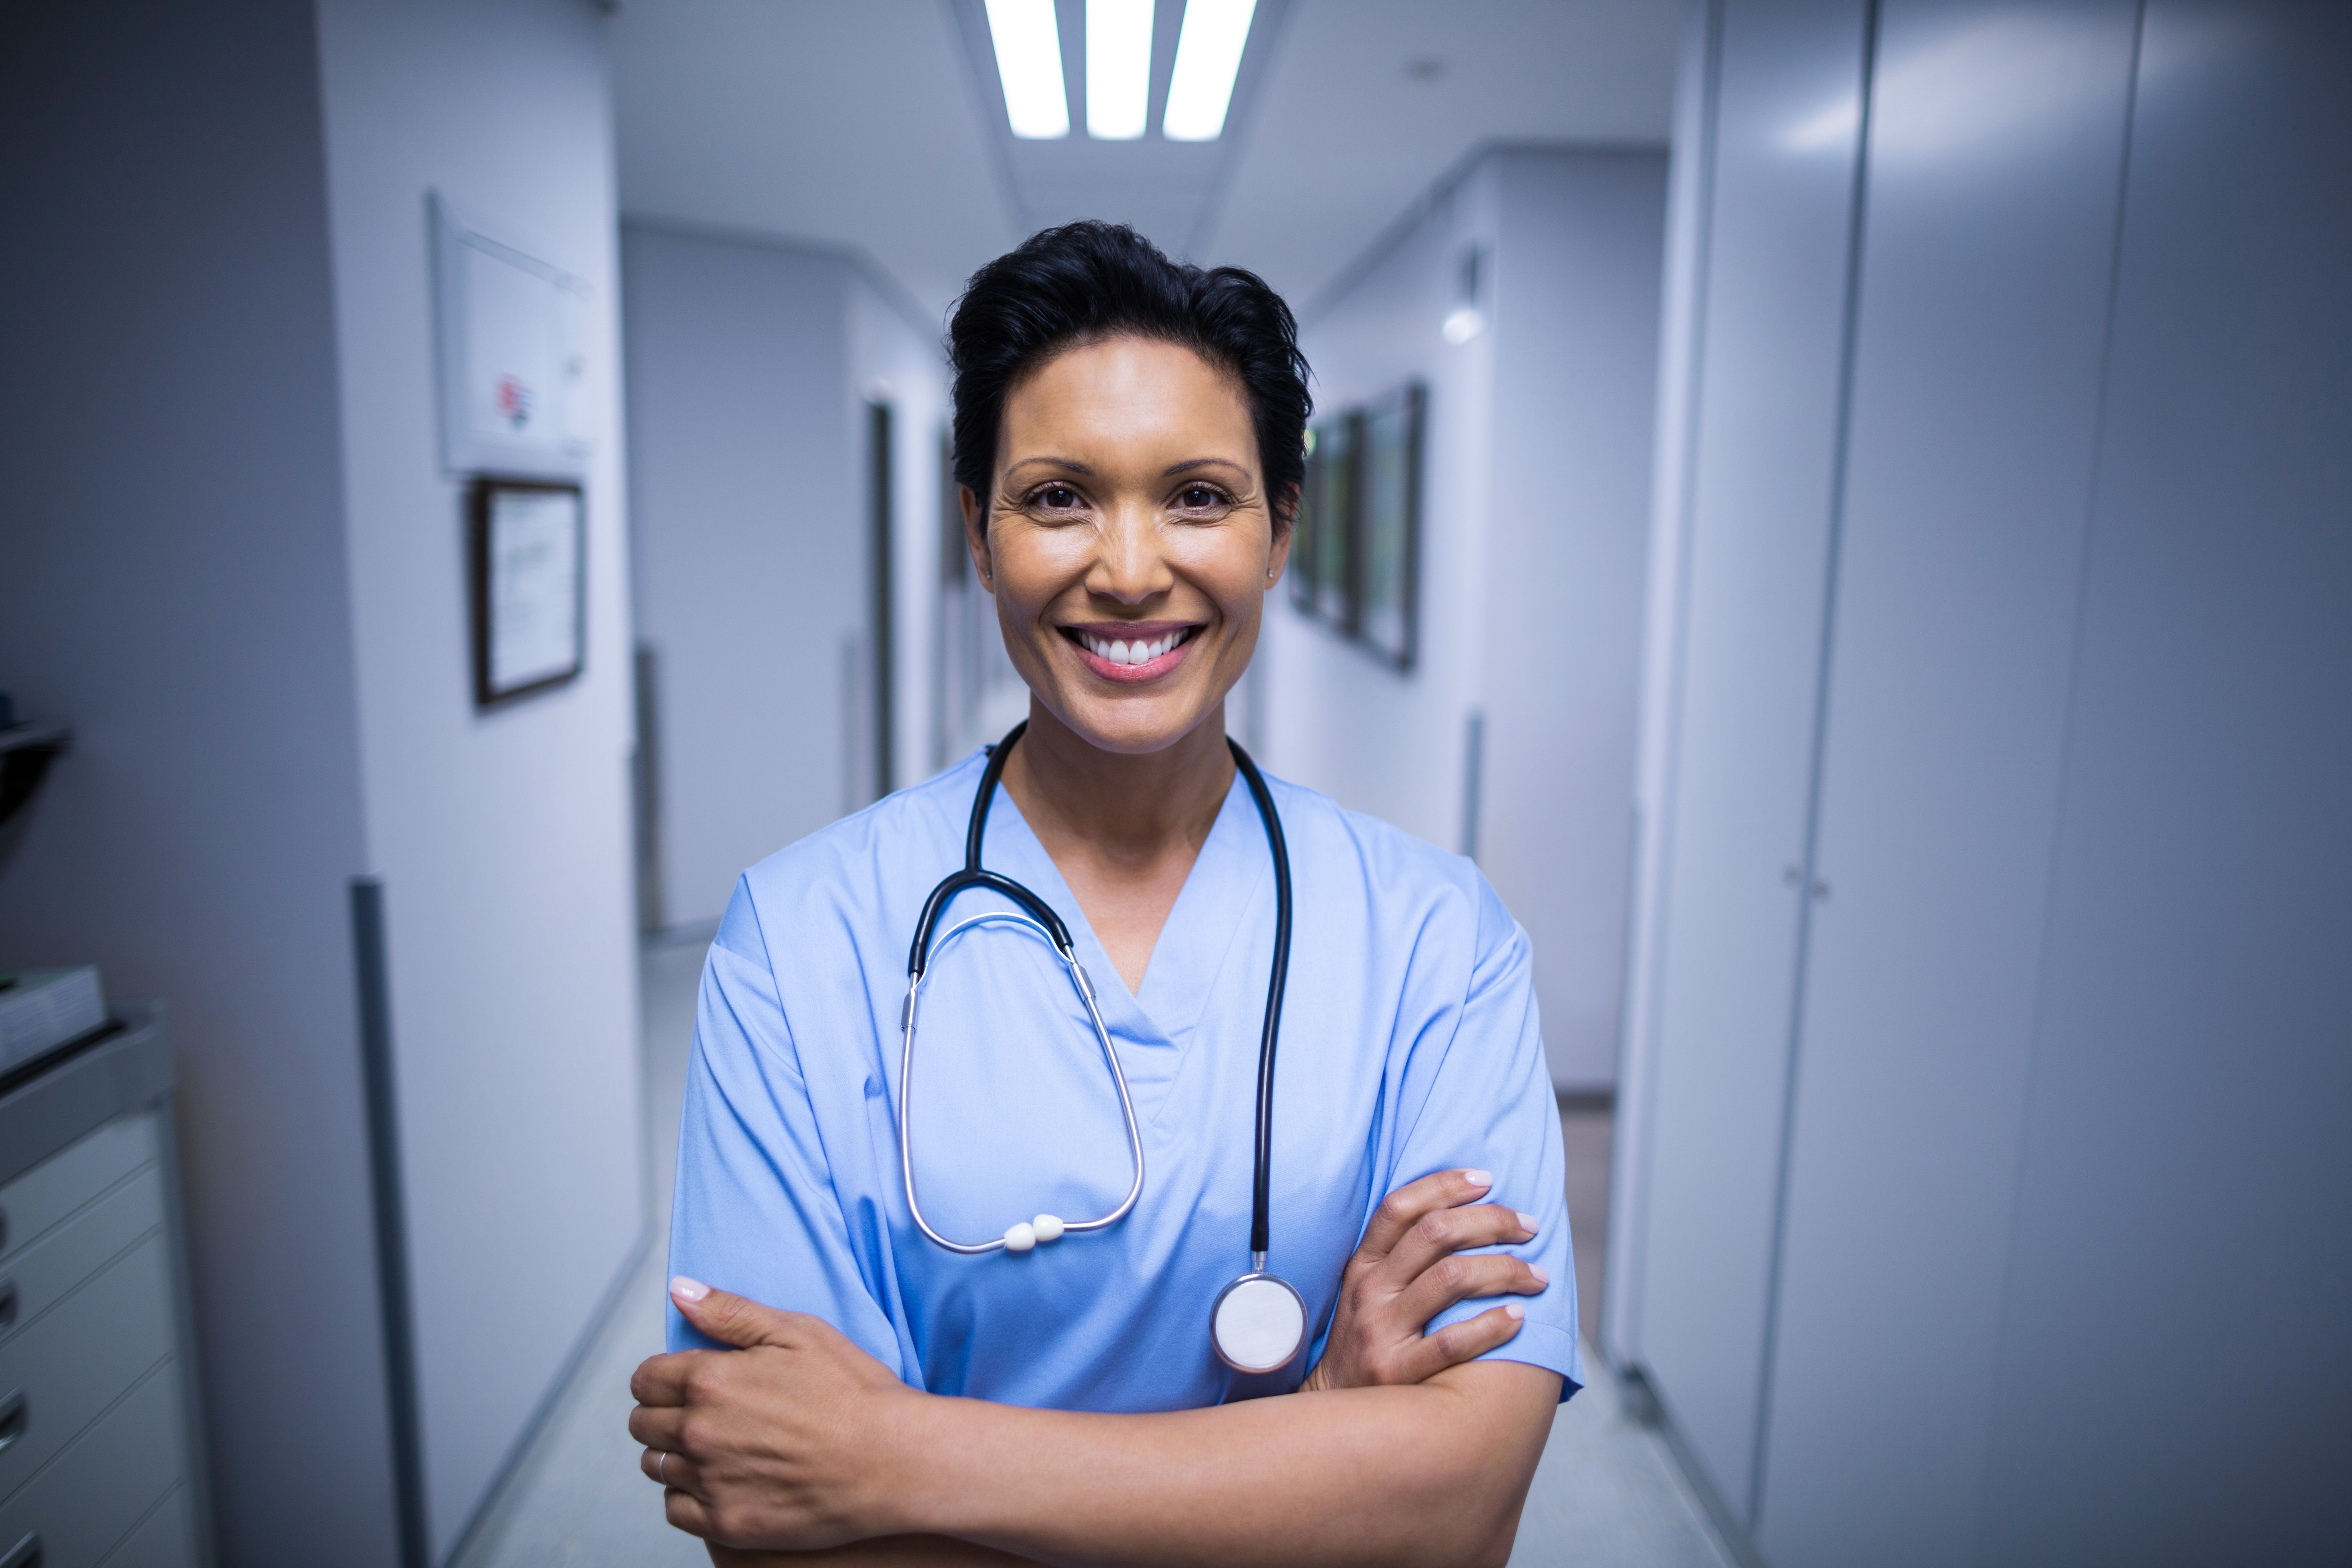 Benefits of being a rapid-response healthcare professional